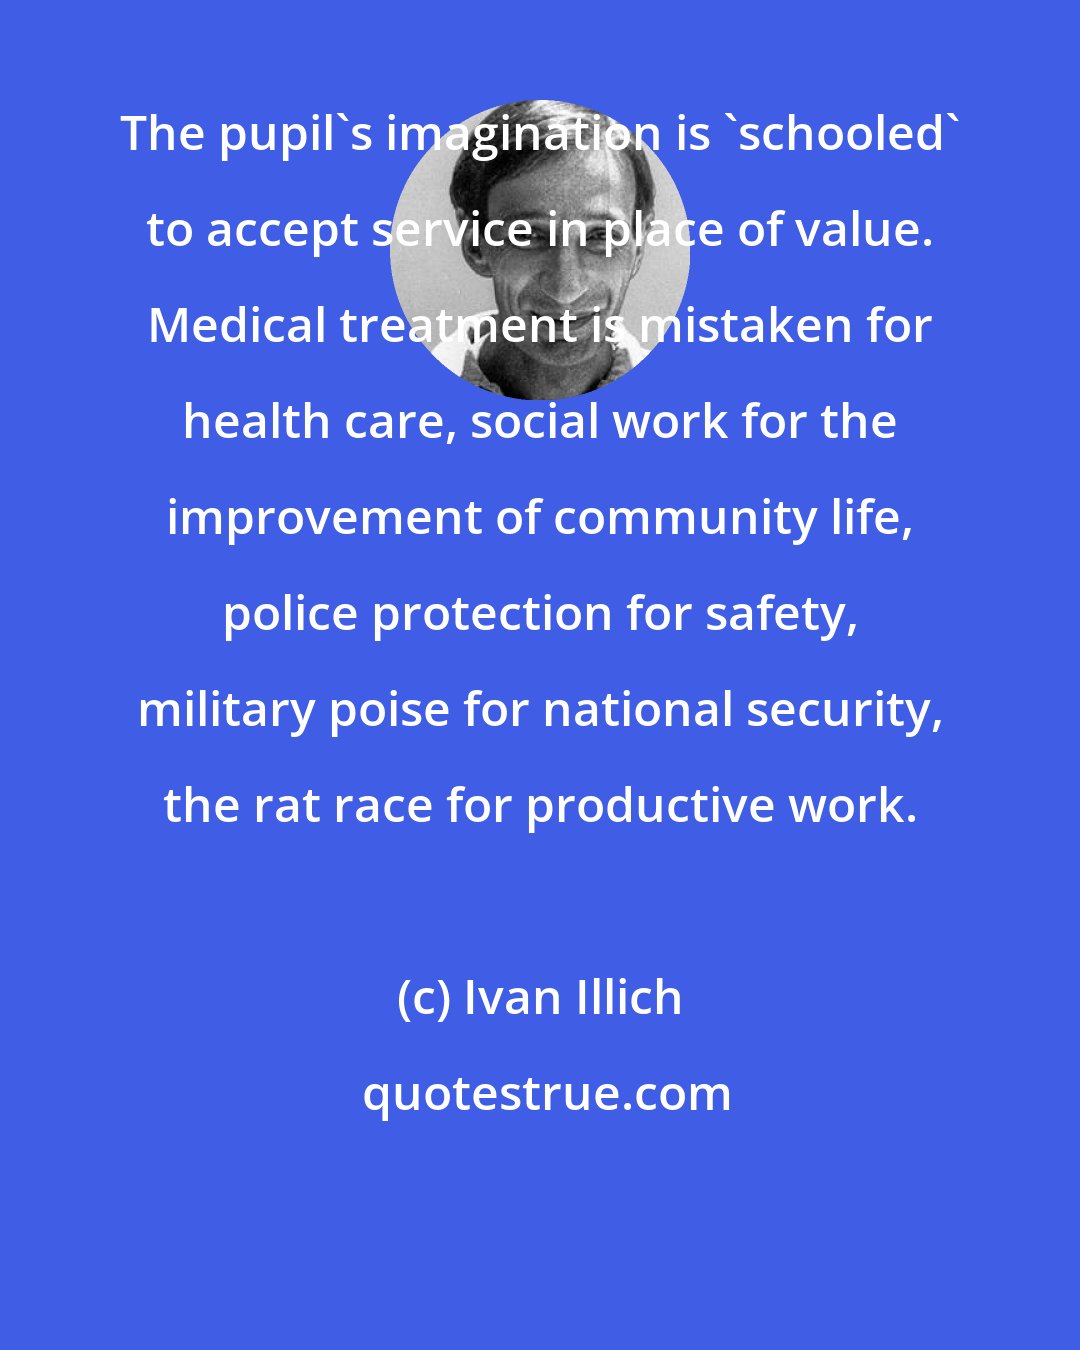 Ivan Illich: The pupil's imagination is 'schooled' to accept service in place of value. Medical treatment is mistaken for health care, social work for the improvement of community life, police protection for safety, military poise for national security, the rat race for productive work.